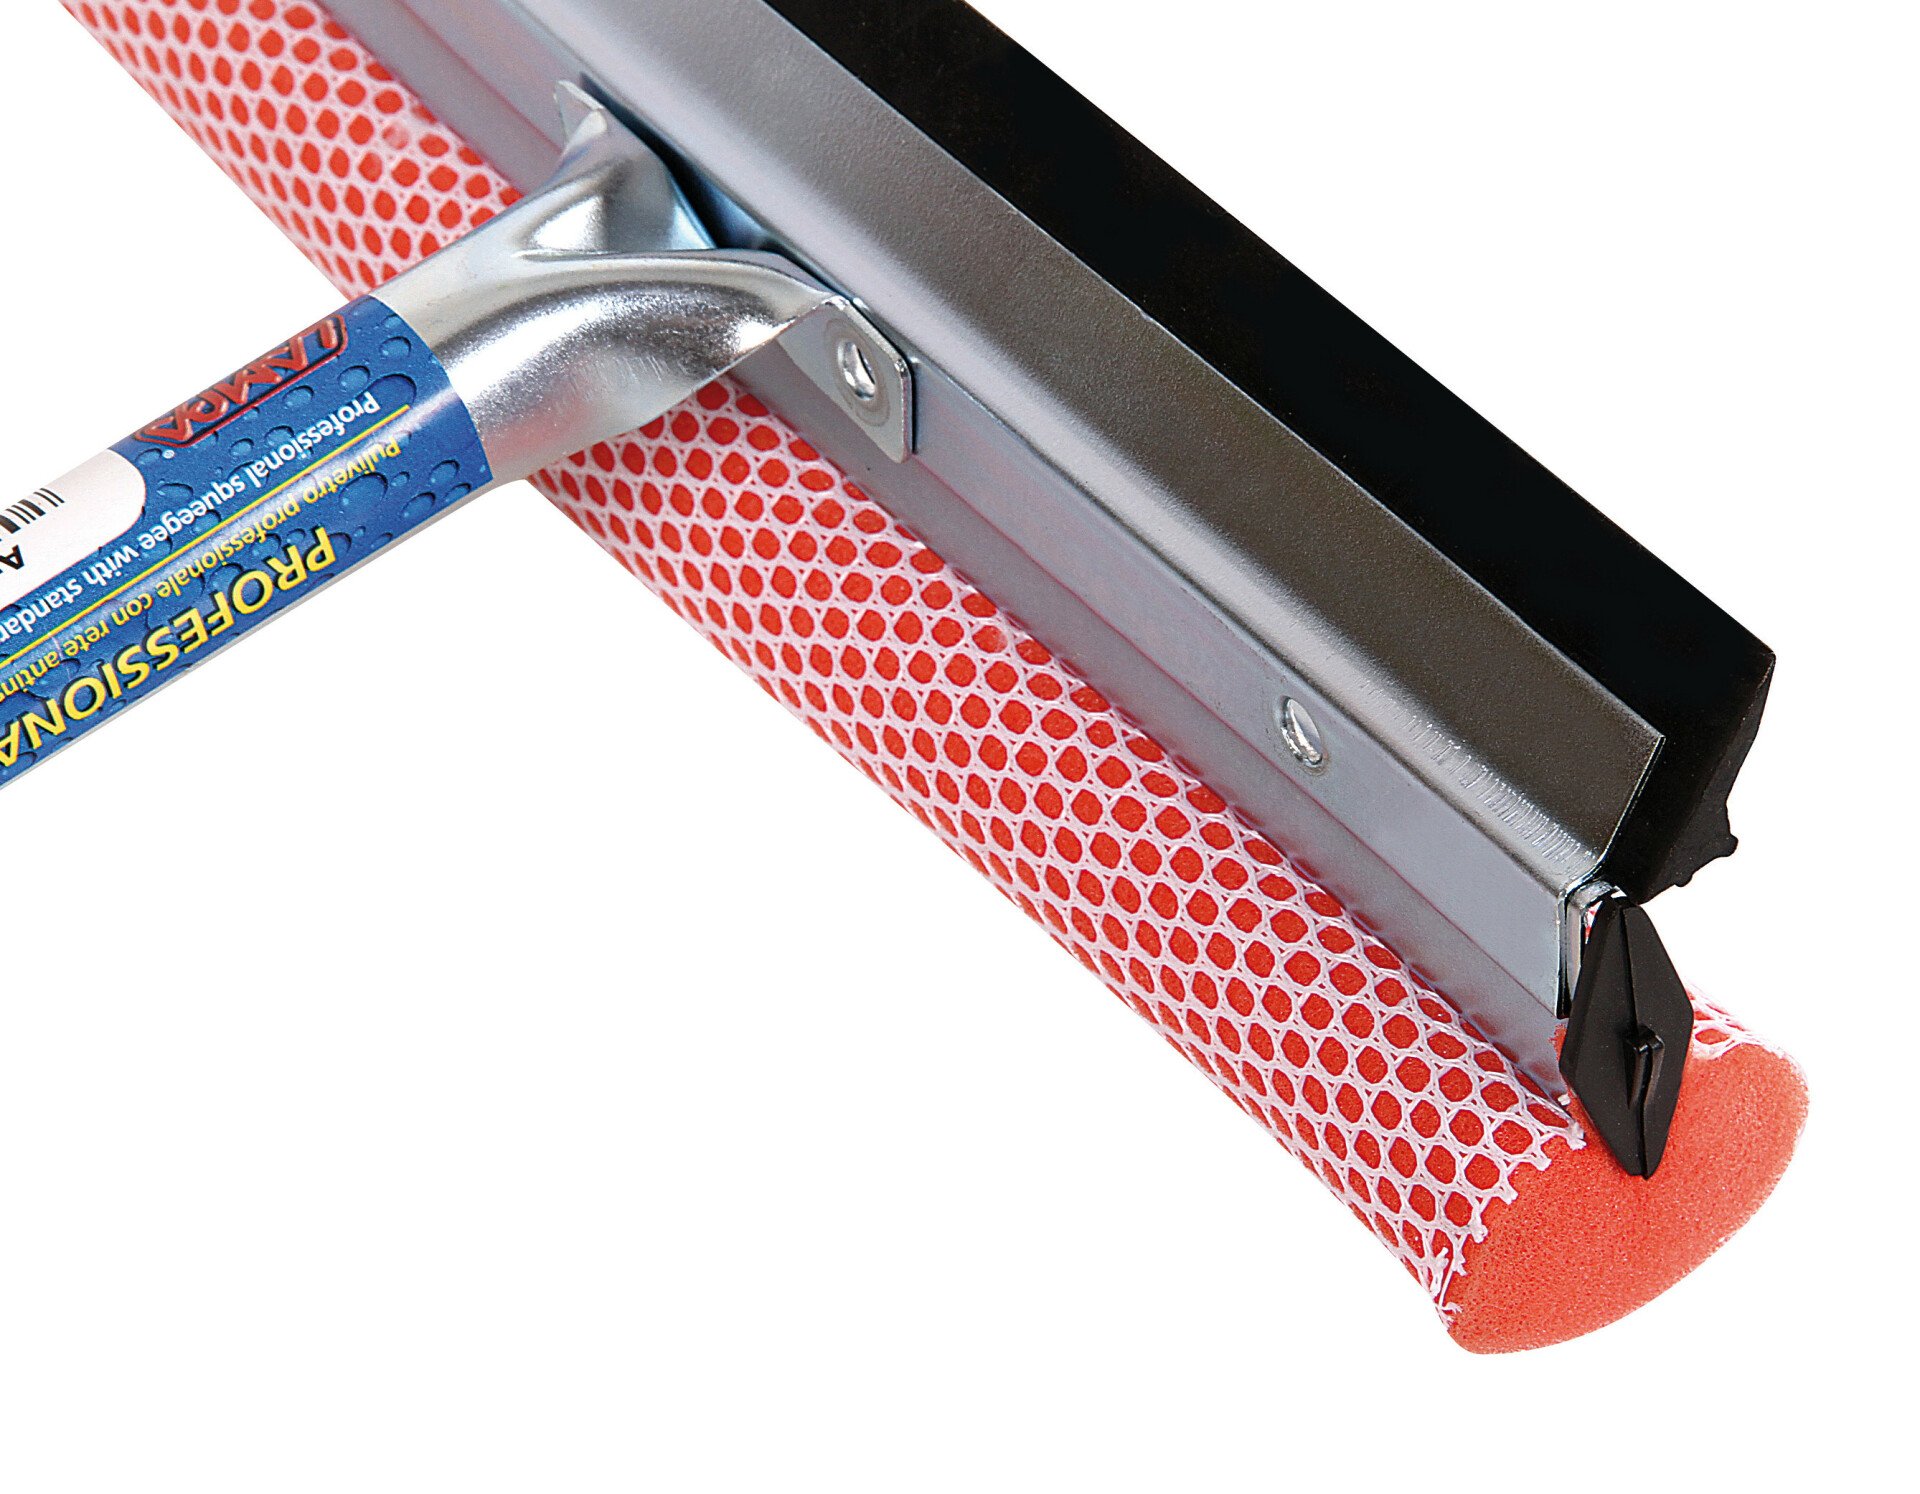 Professional metal squeegee with extra wooden handle - 25cm thumb